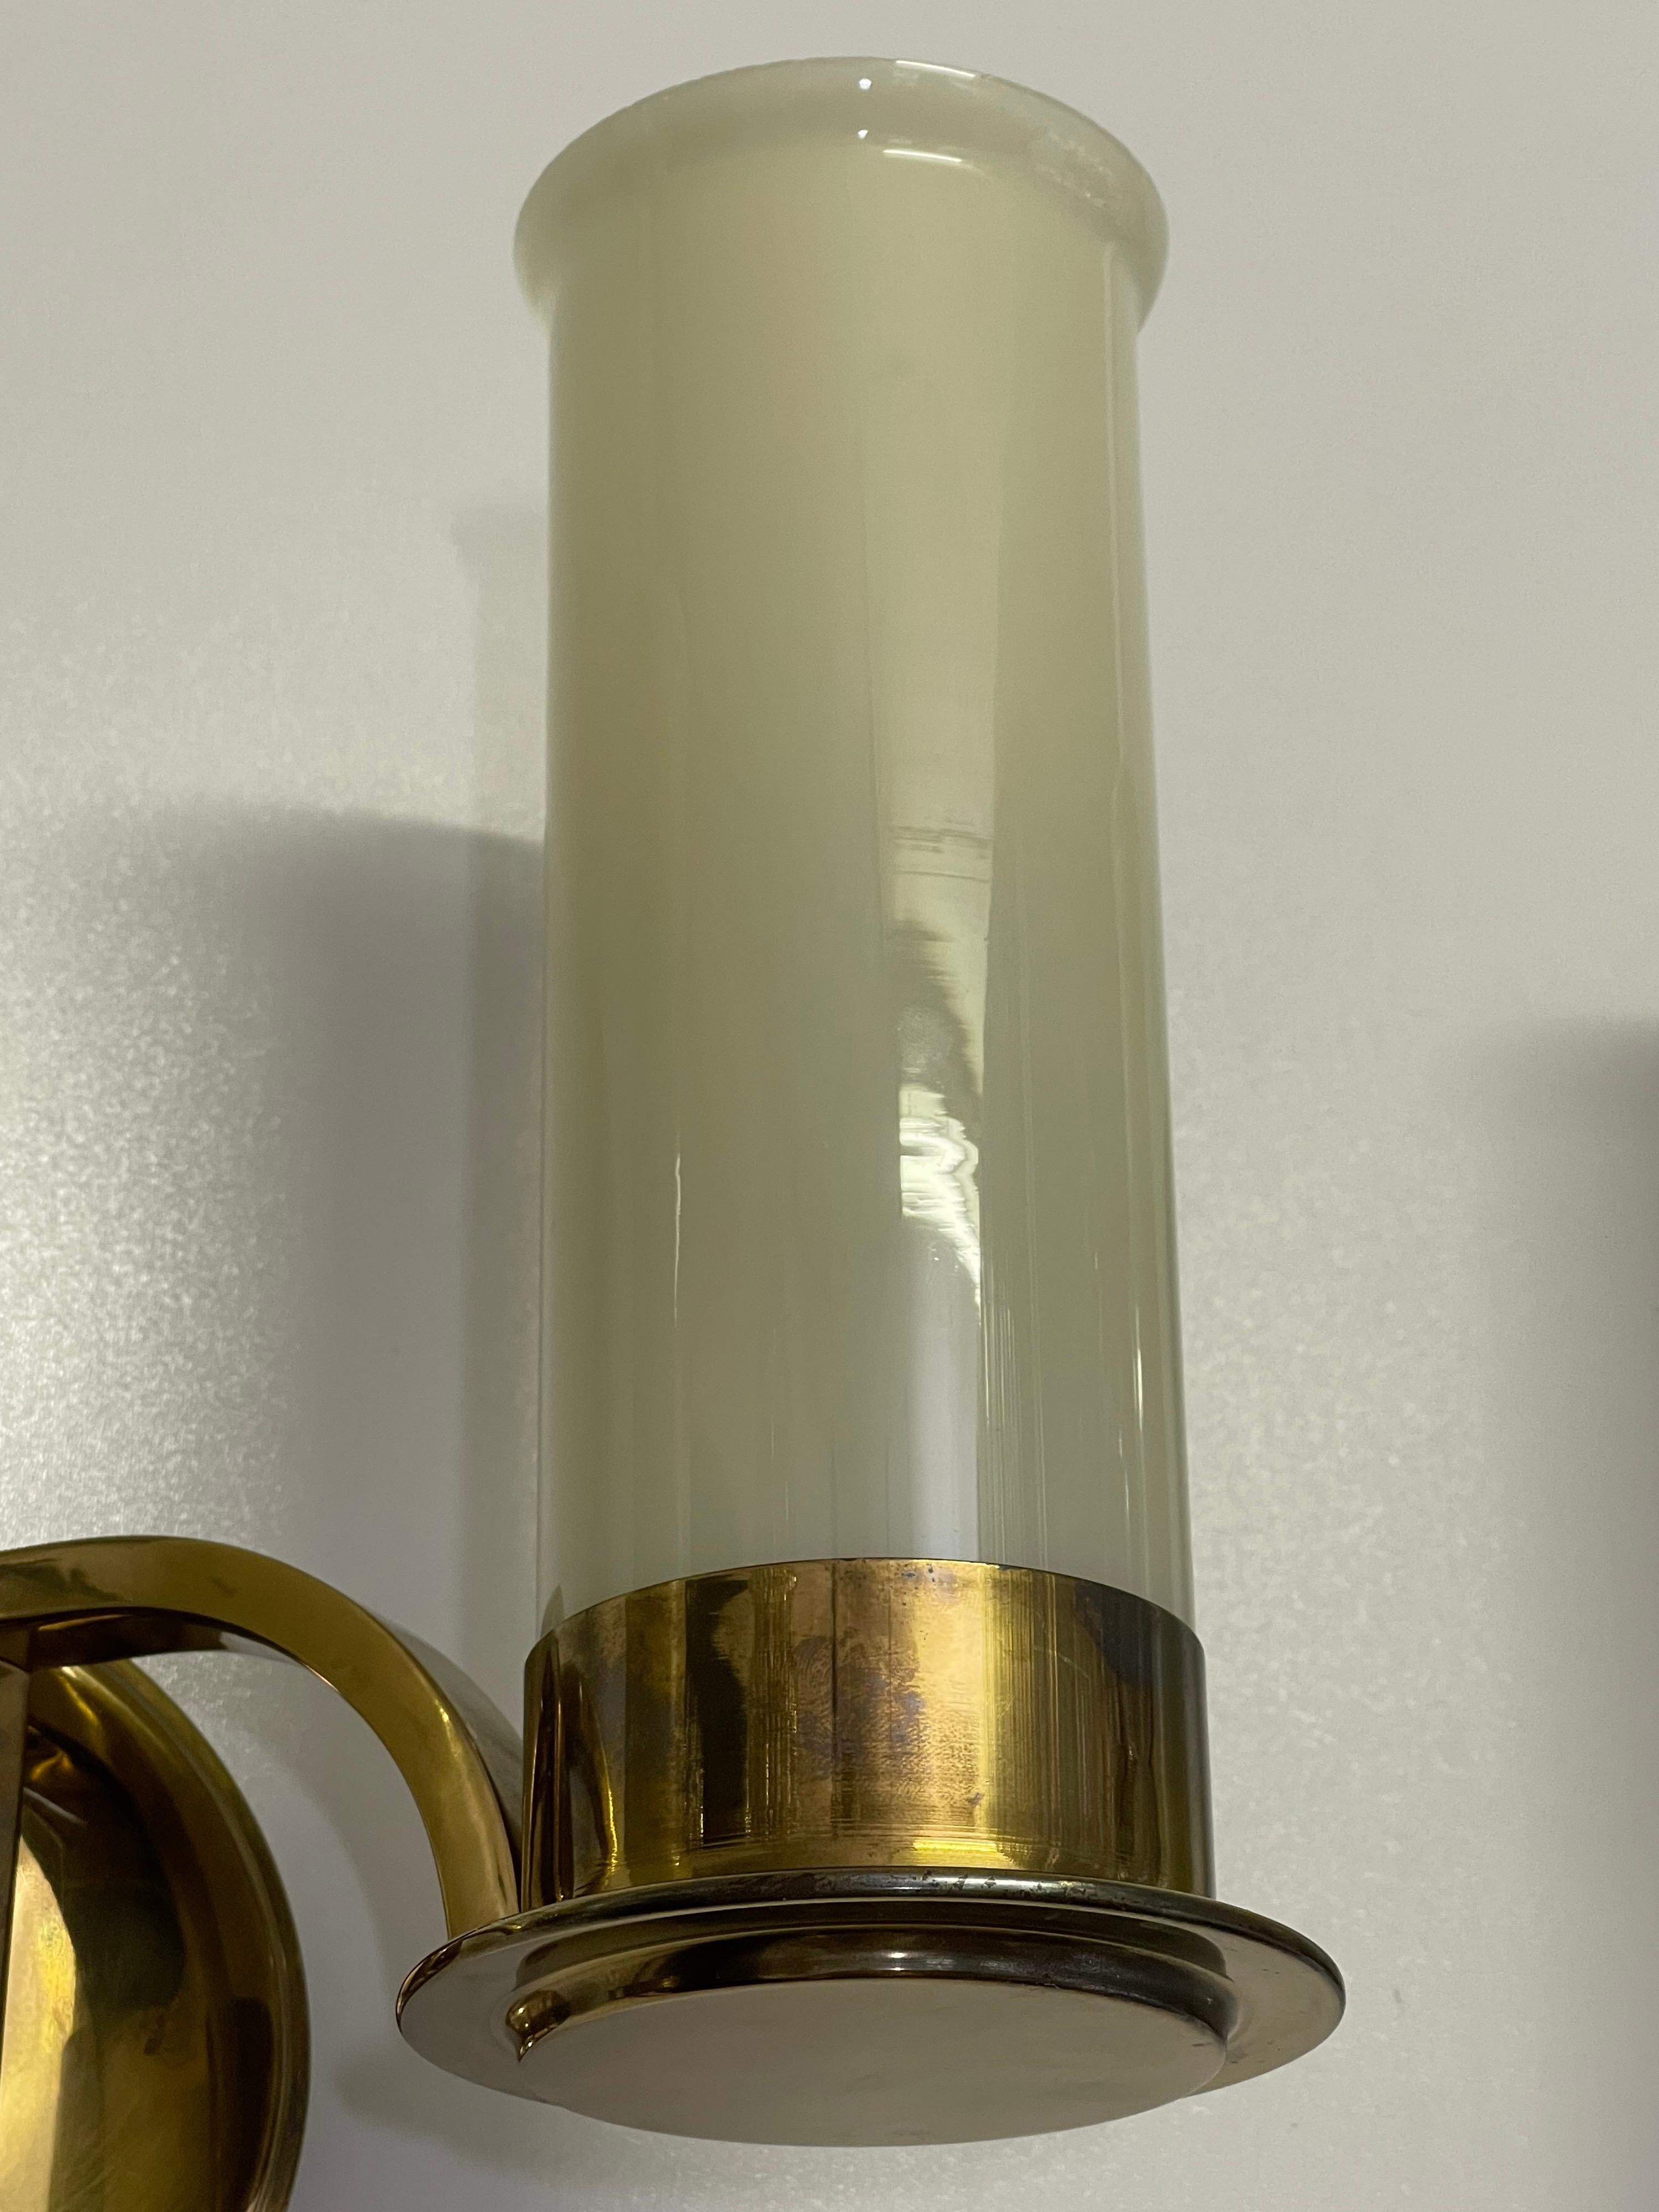 Set of Four Large Brass and Opal Glass Wall Sconces, circa 1930s For Sale 3